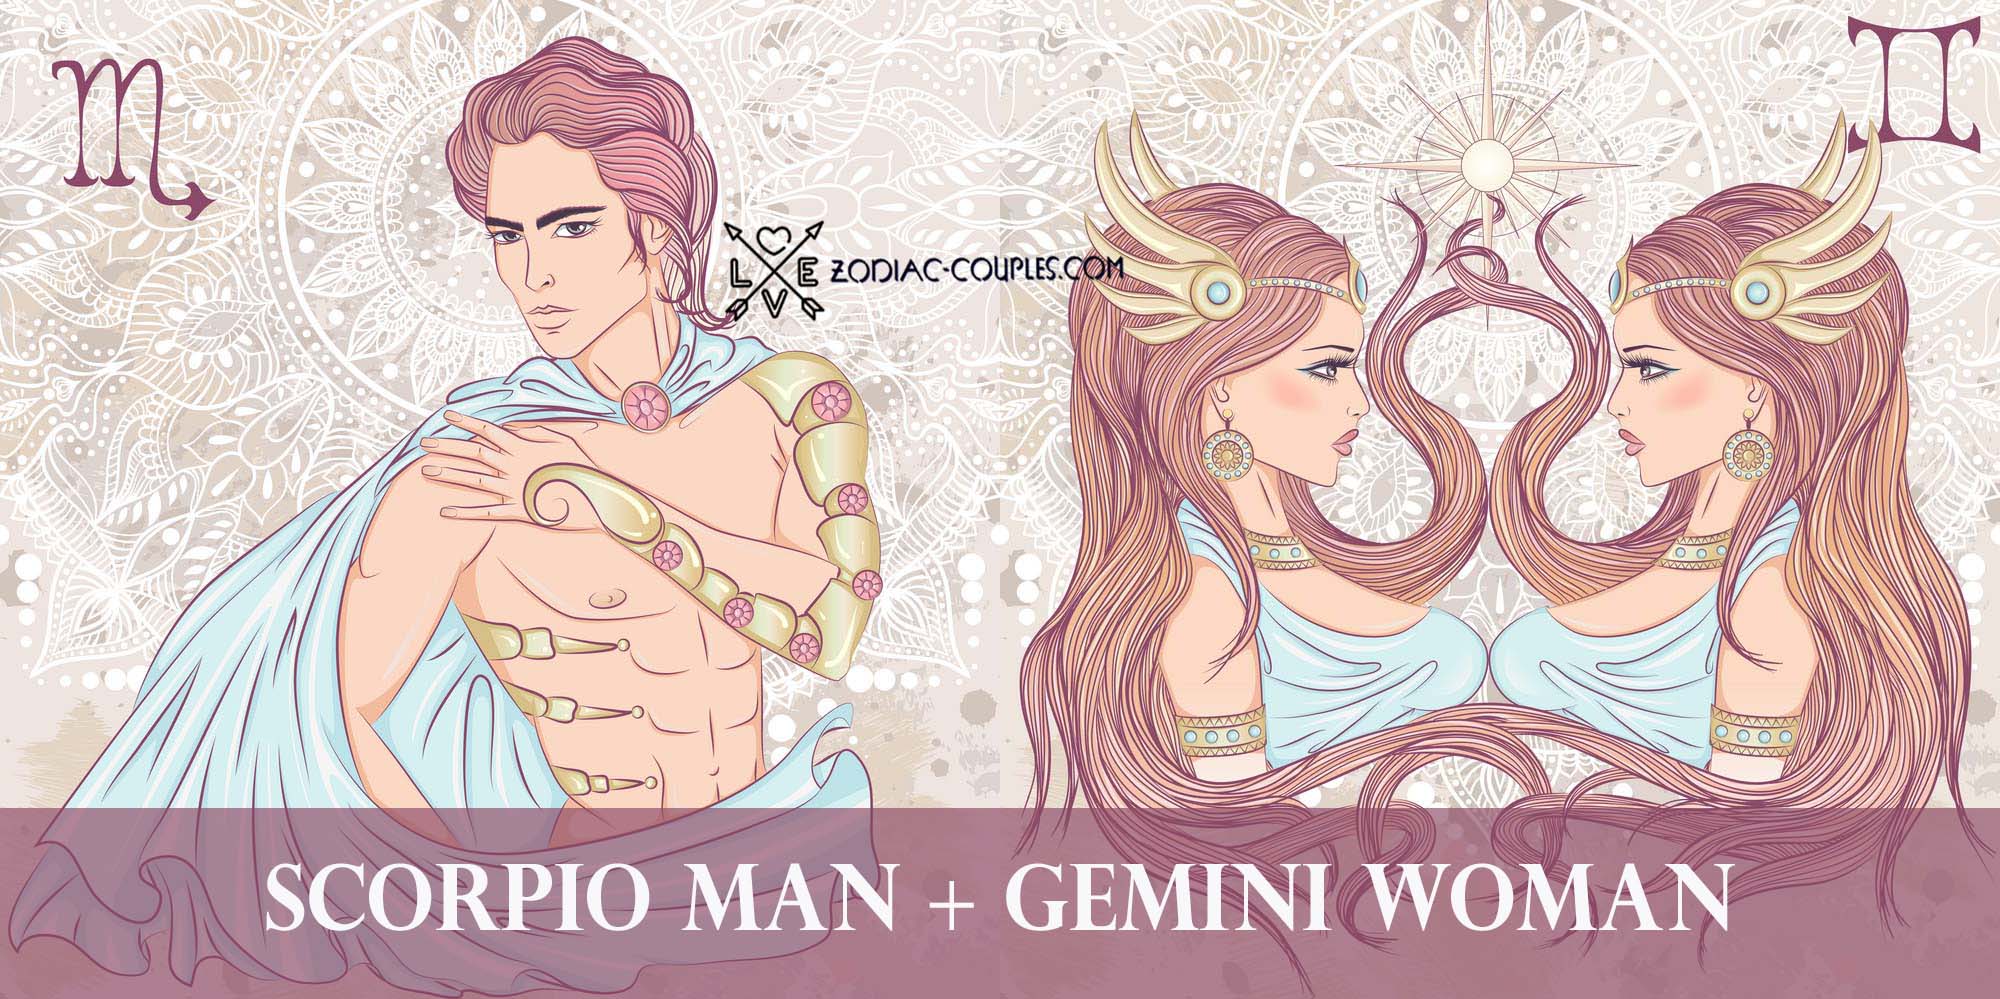 are between famous Scorpio man + Gemini woman couples and are those Zodiac ...